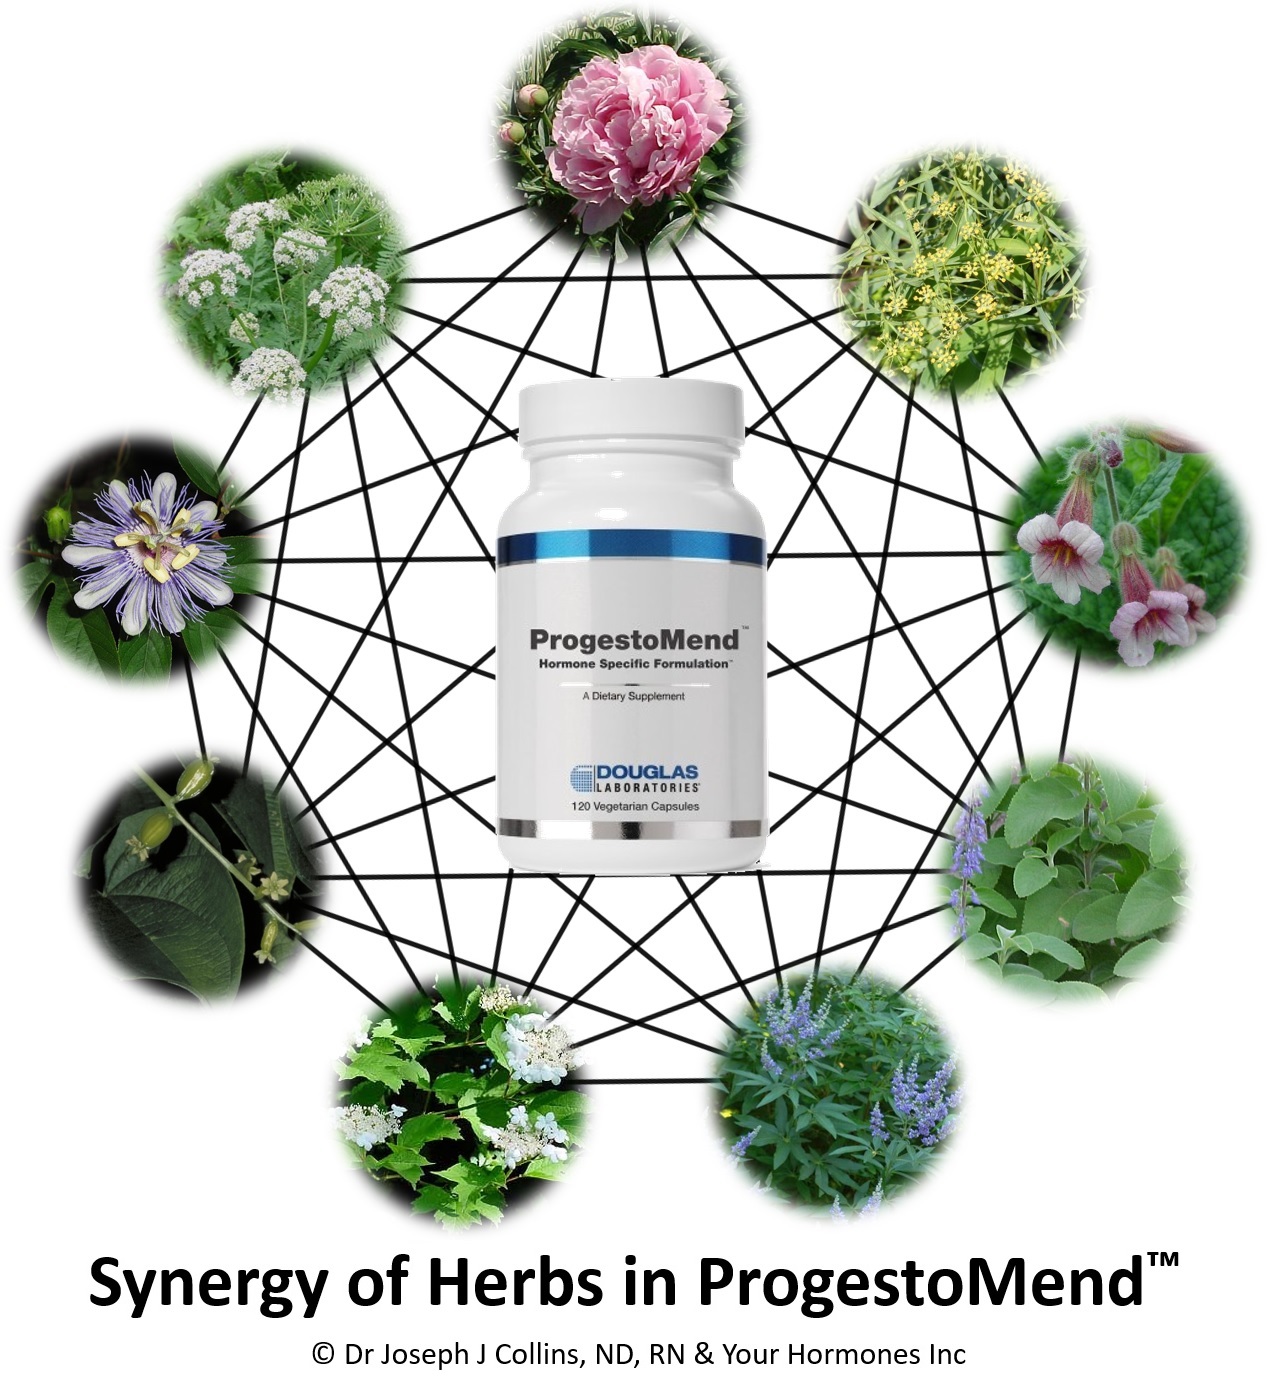 Synergy of Herbs in ProgestoMend™